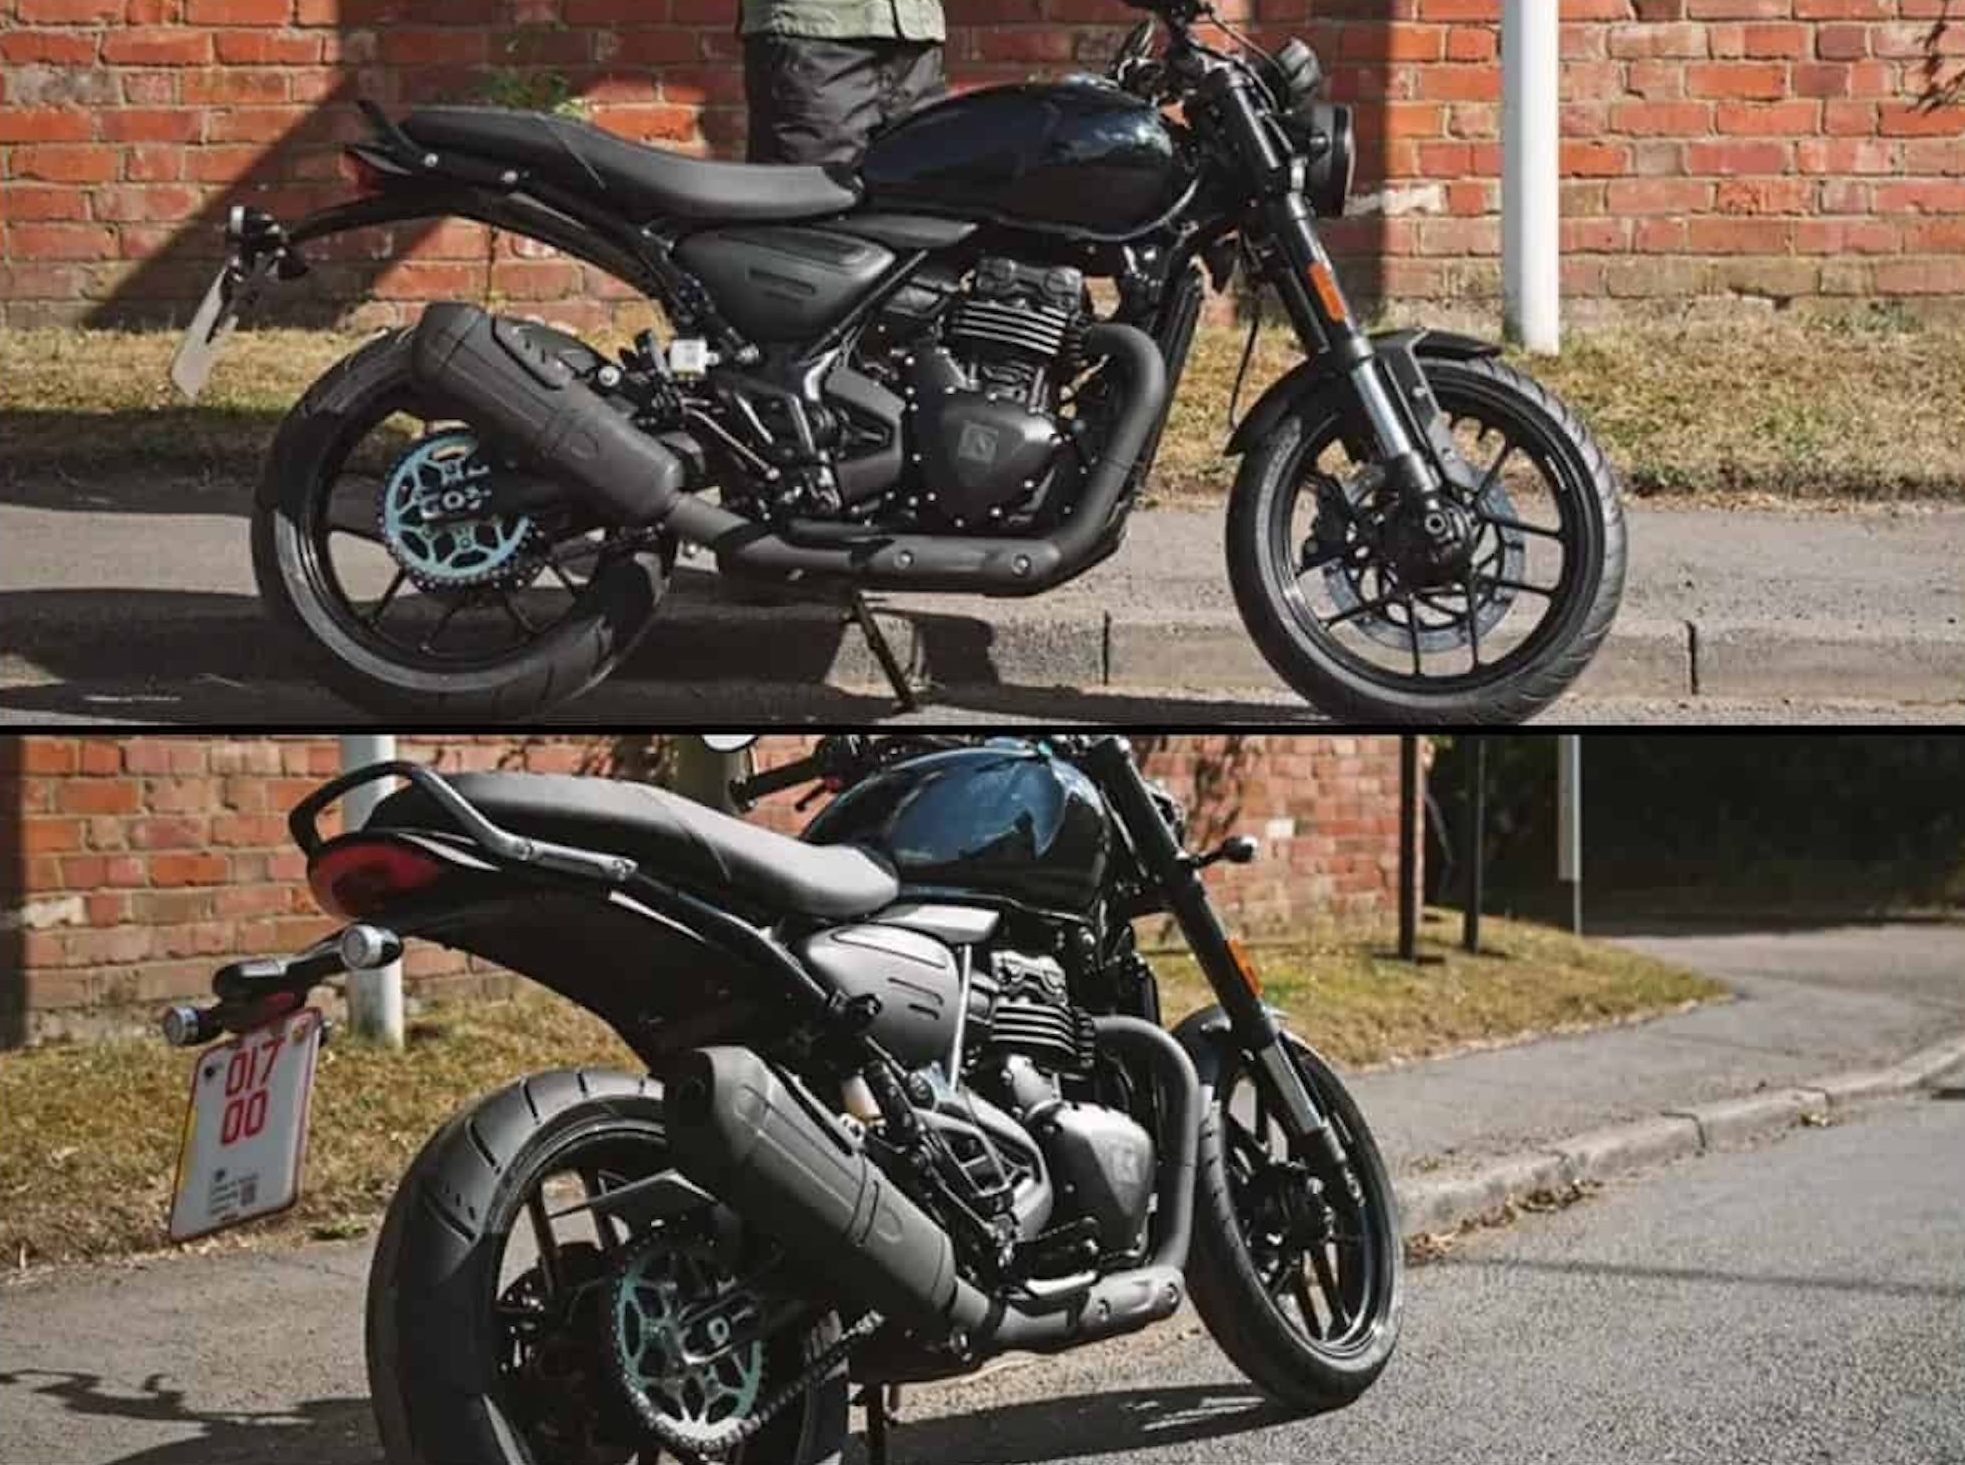 A view of the new Neo-retro naked and scrambler roadsters that Triumph and Bajaj will be debuting in July. Media sourced from India Car News.